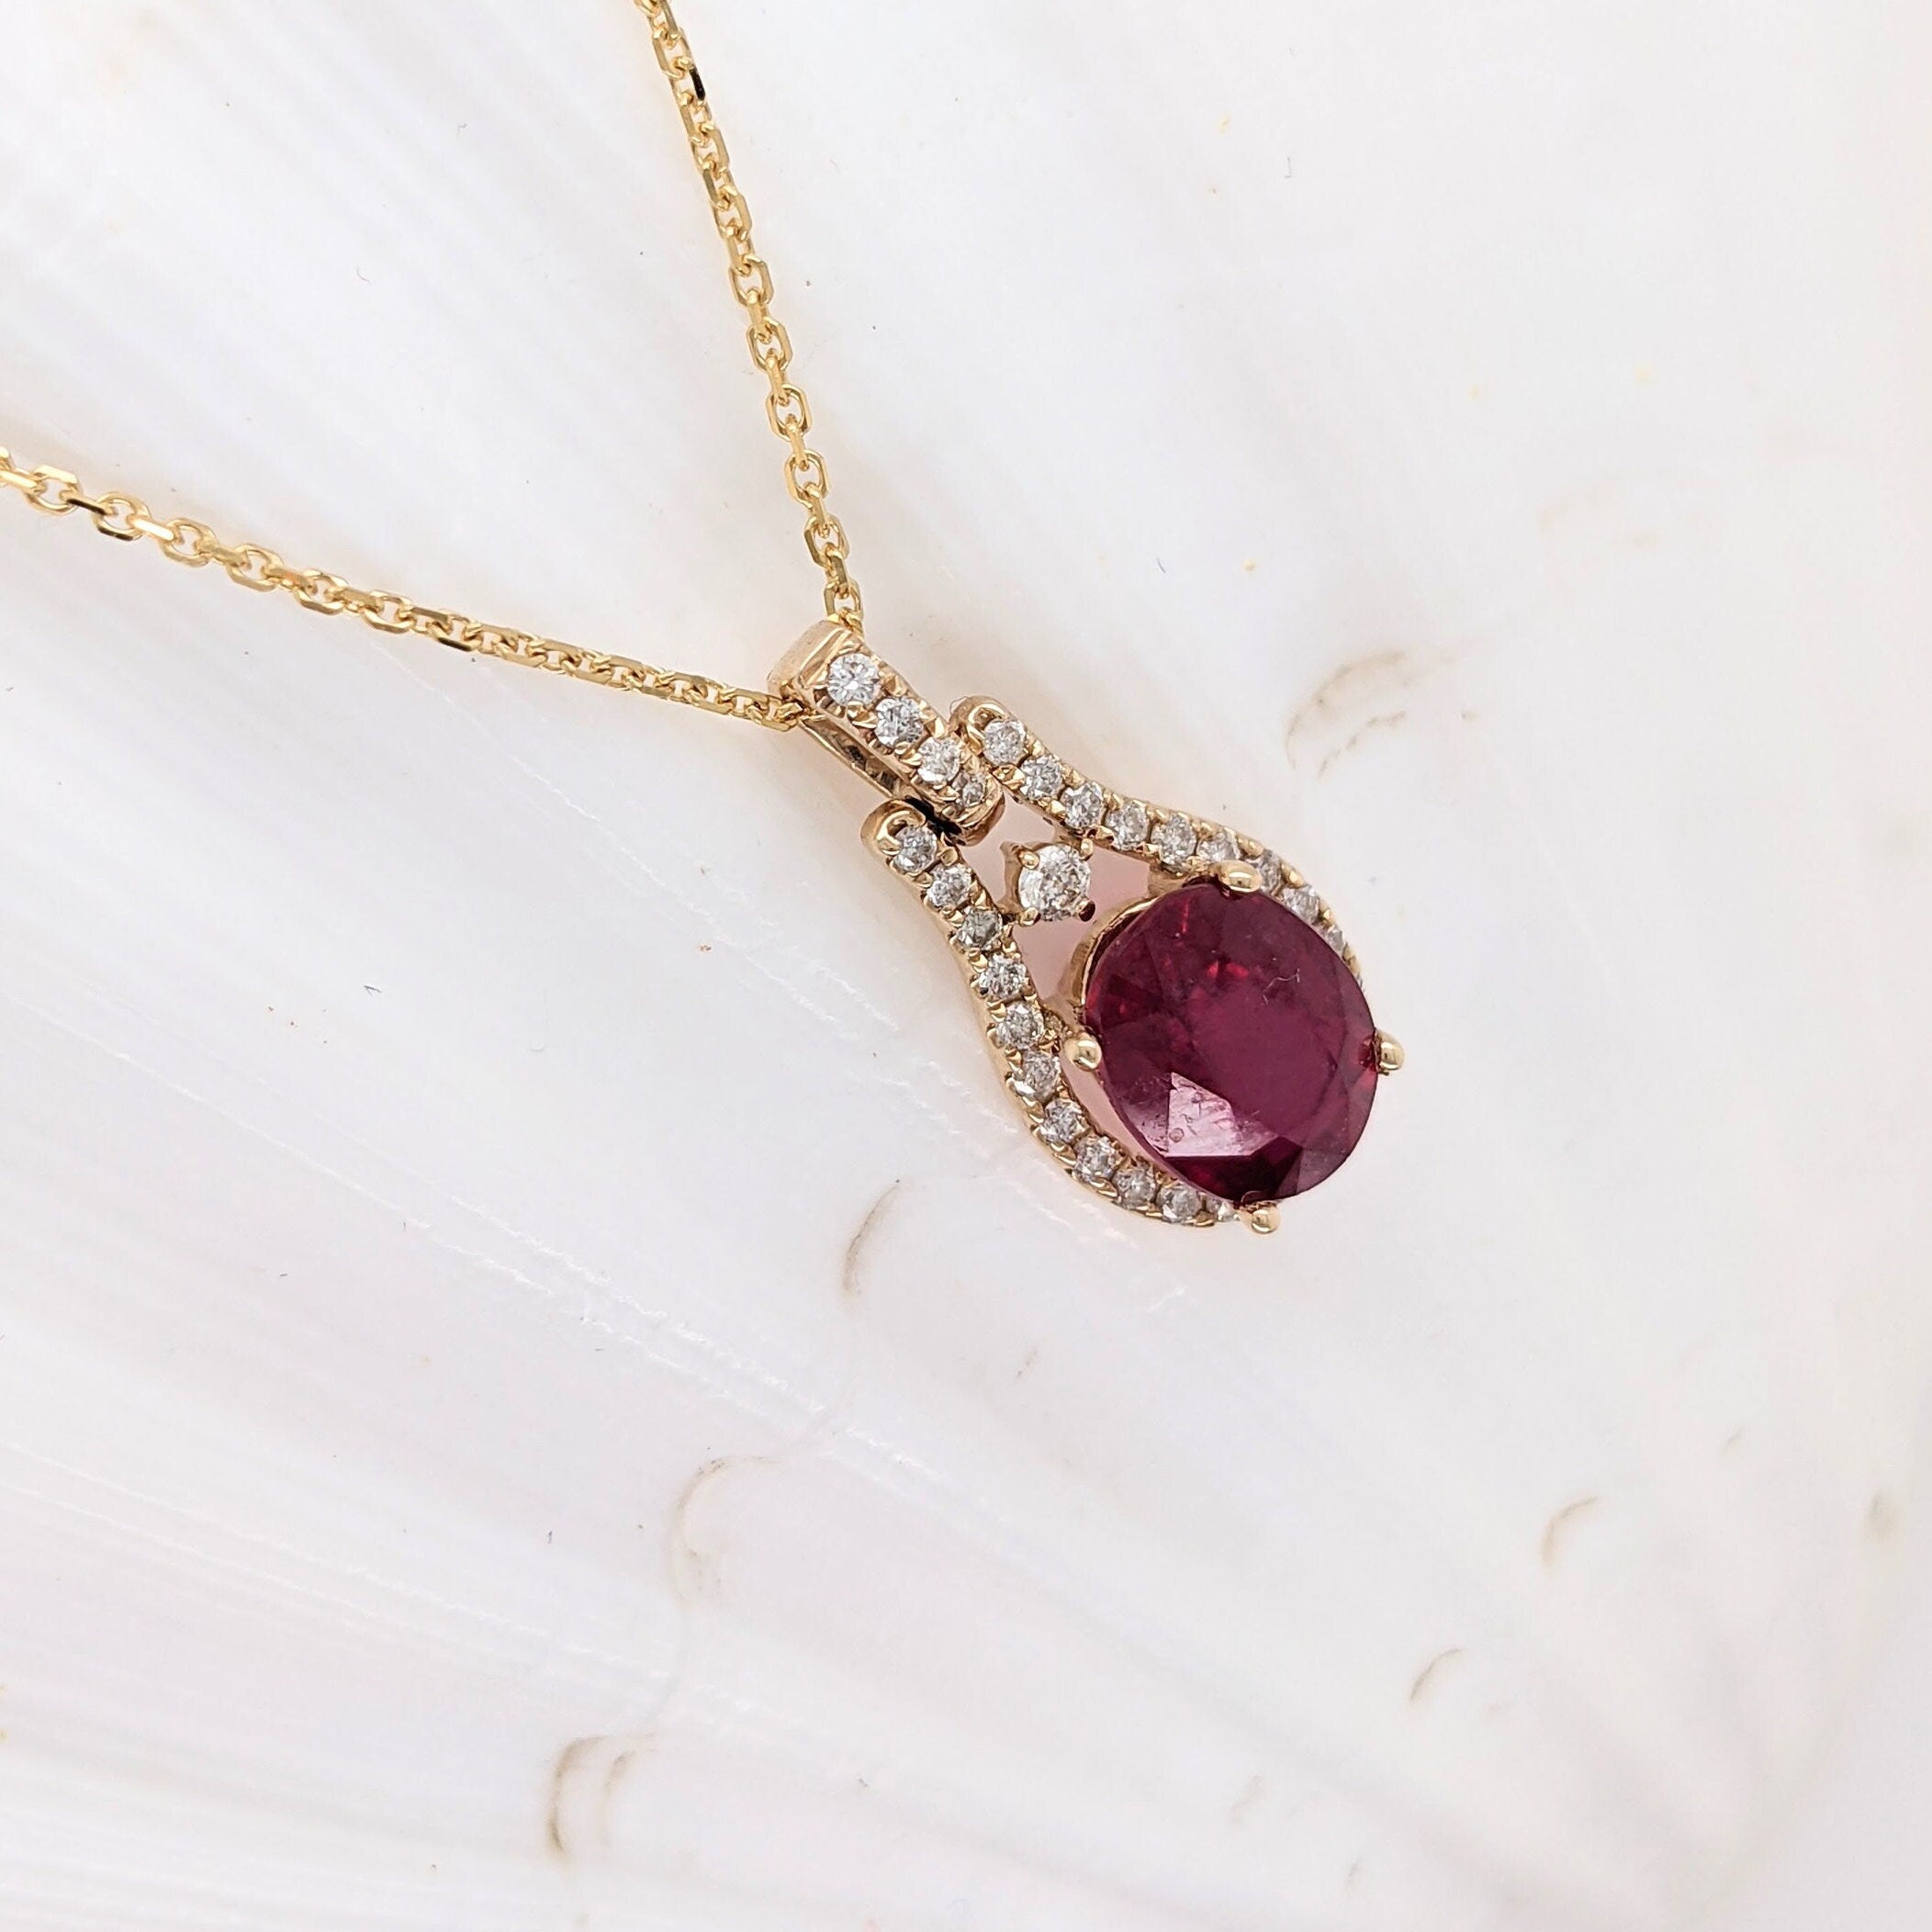 Elegant Ruby Pendant in Solid 14K Yellow, White or Rose Gold with Natural Diamond Accents | Oval 7x5mm | July Birthstone | Classic Pendant